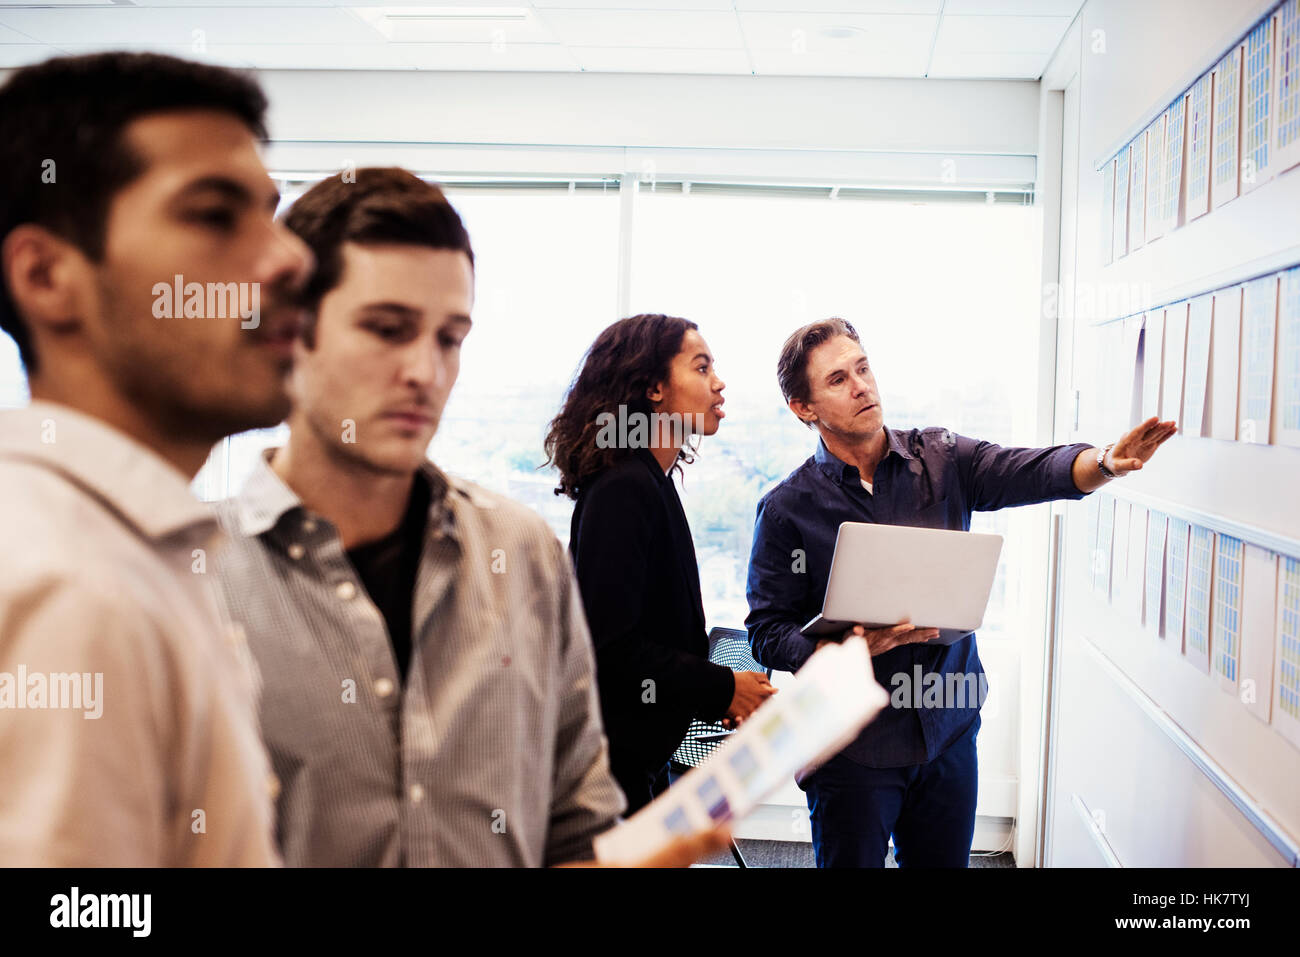 A woman and three men standing in an office looking at a display on a wall. Stock Photo